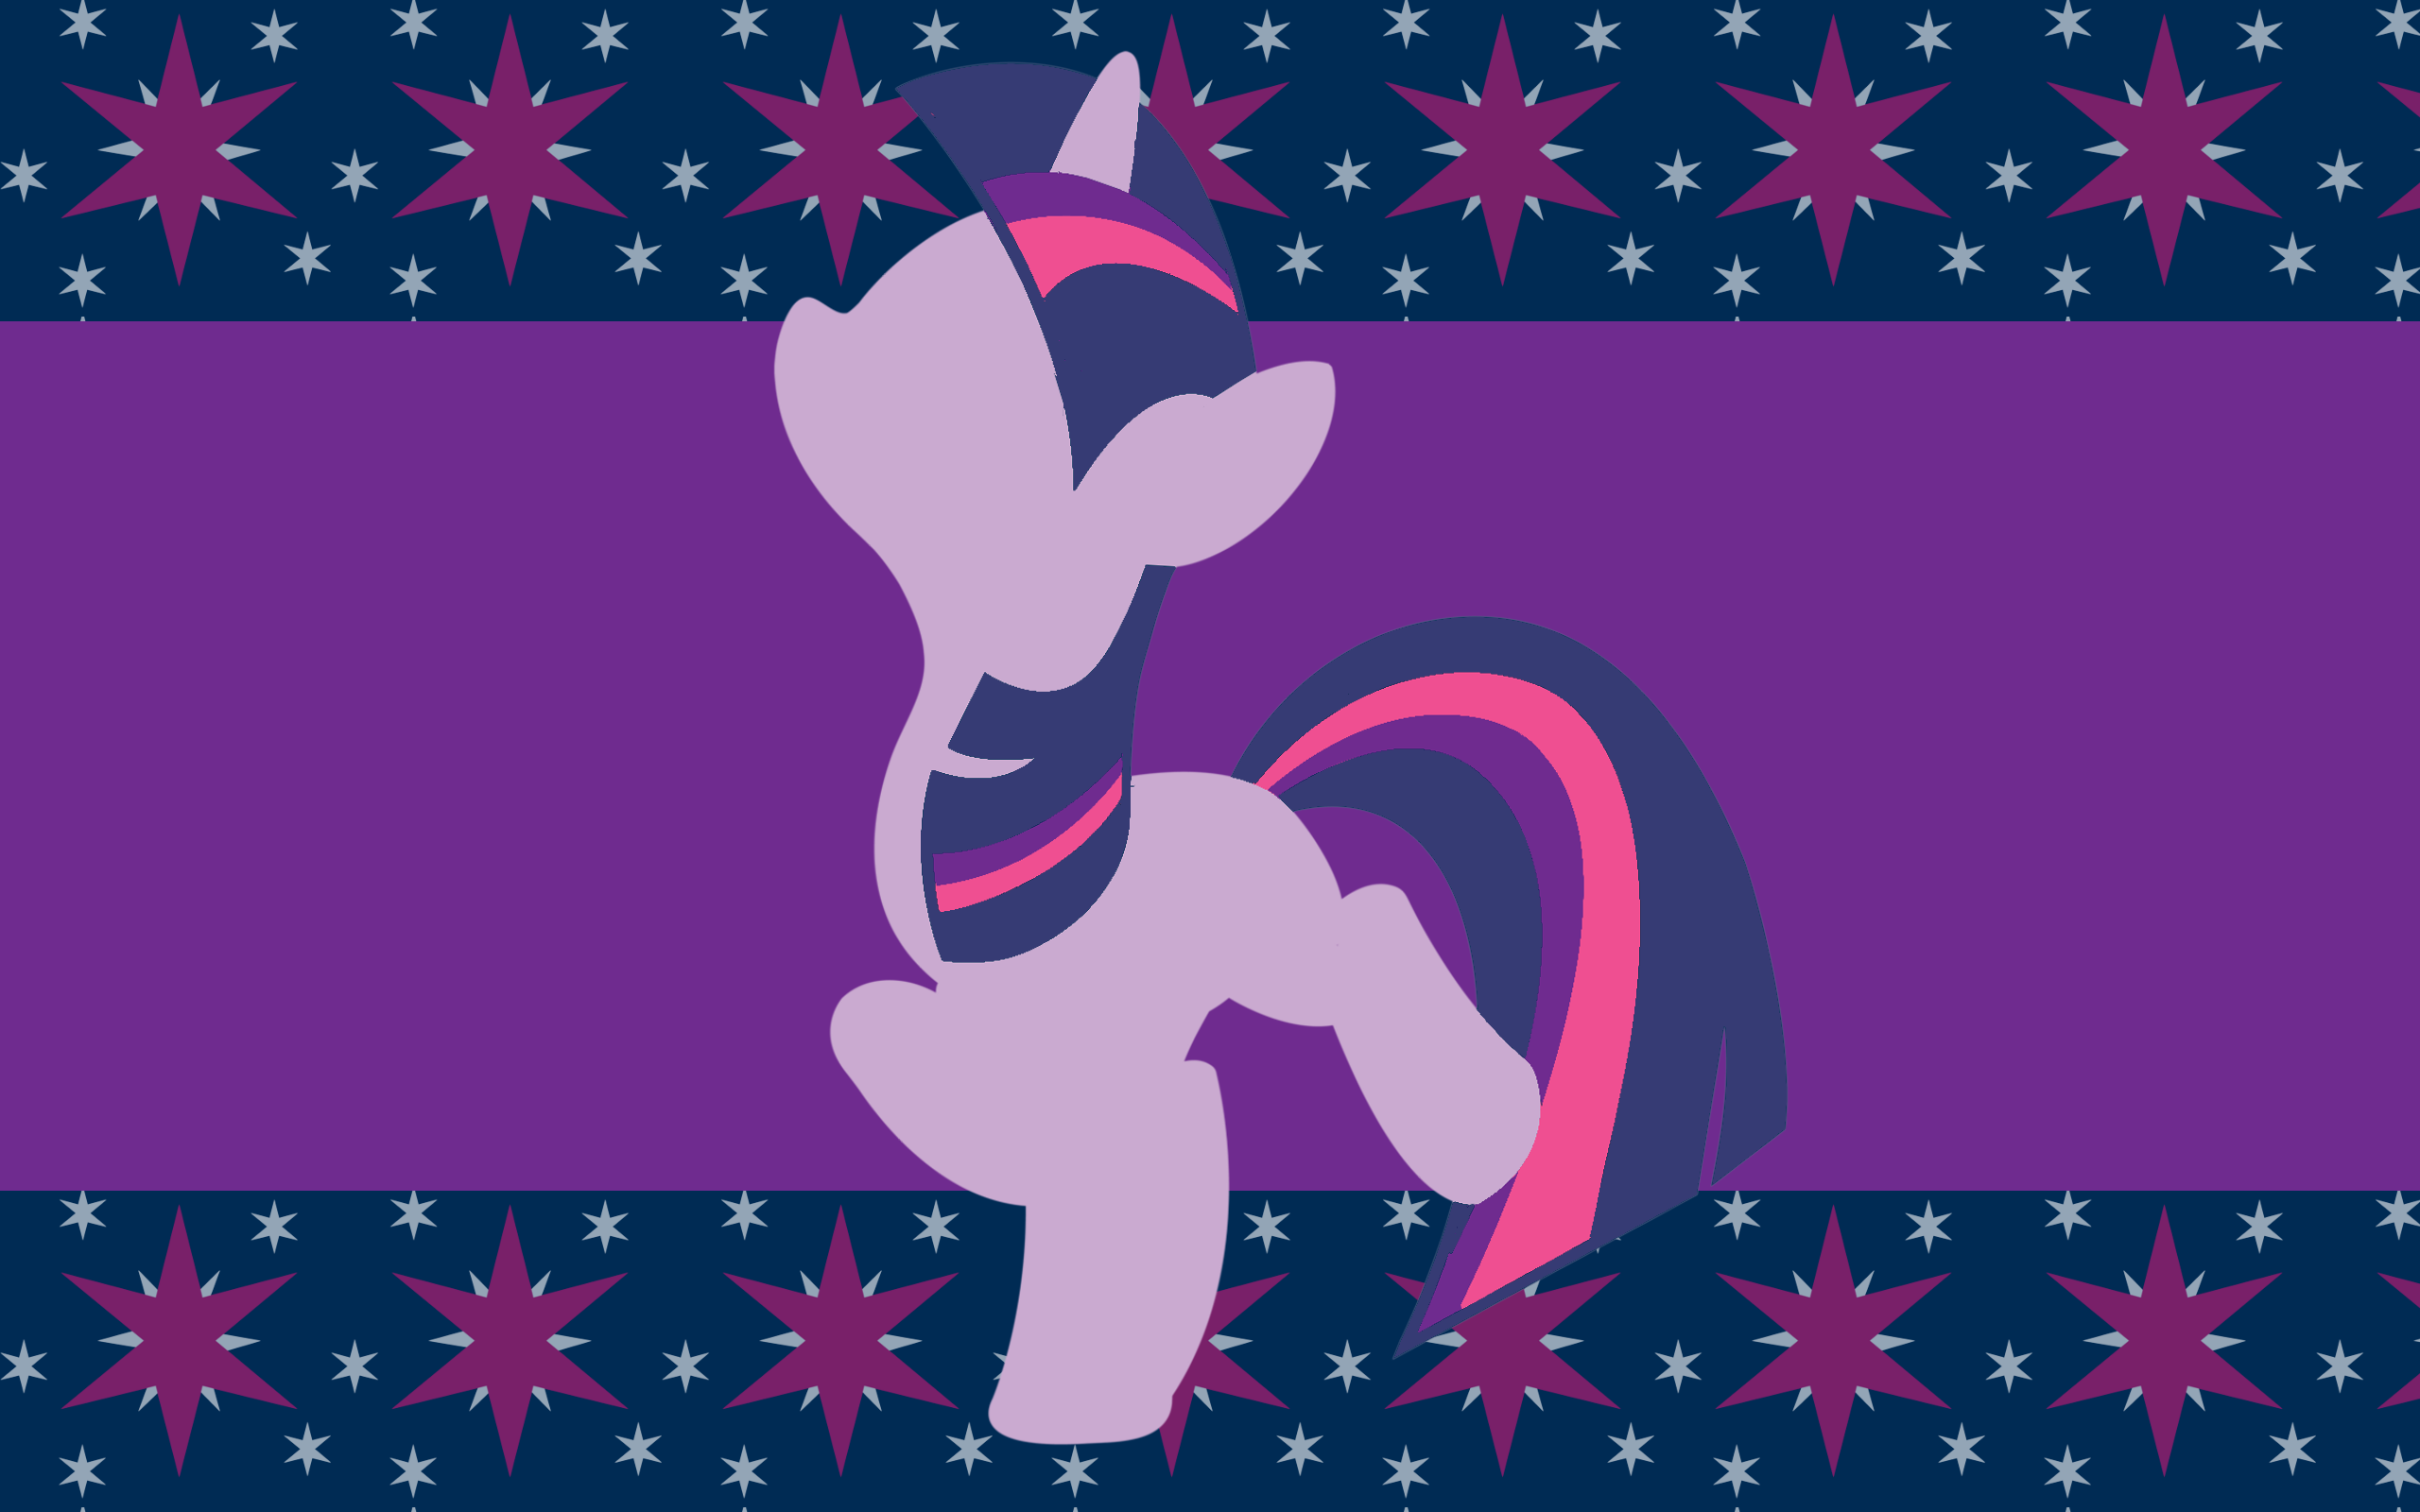 Simply Sparkle WP by AliceHumanSacrifice0, Mihaaaa and ooklah